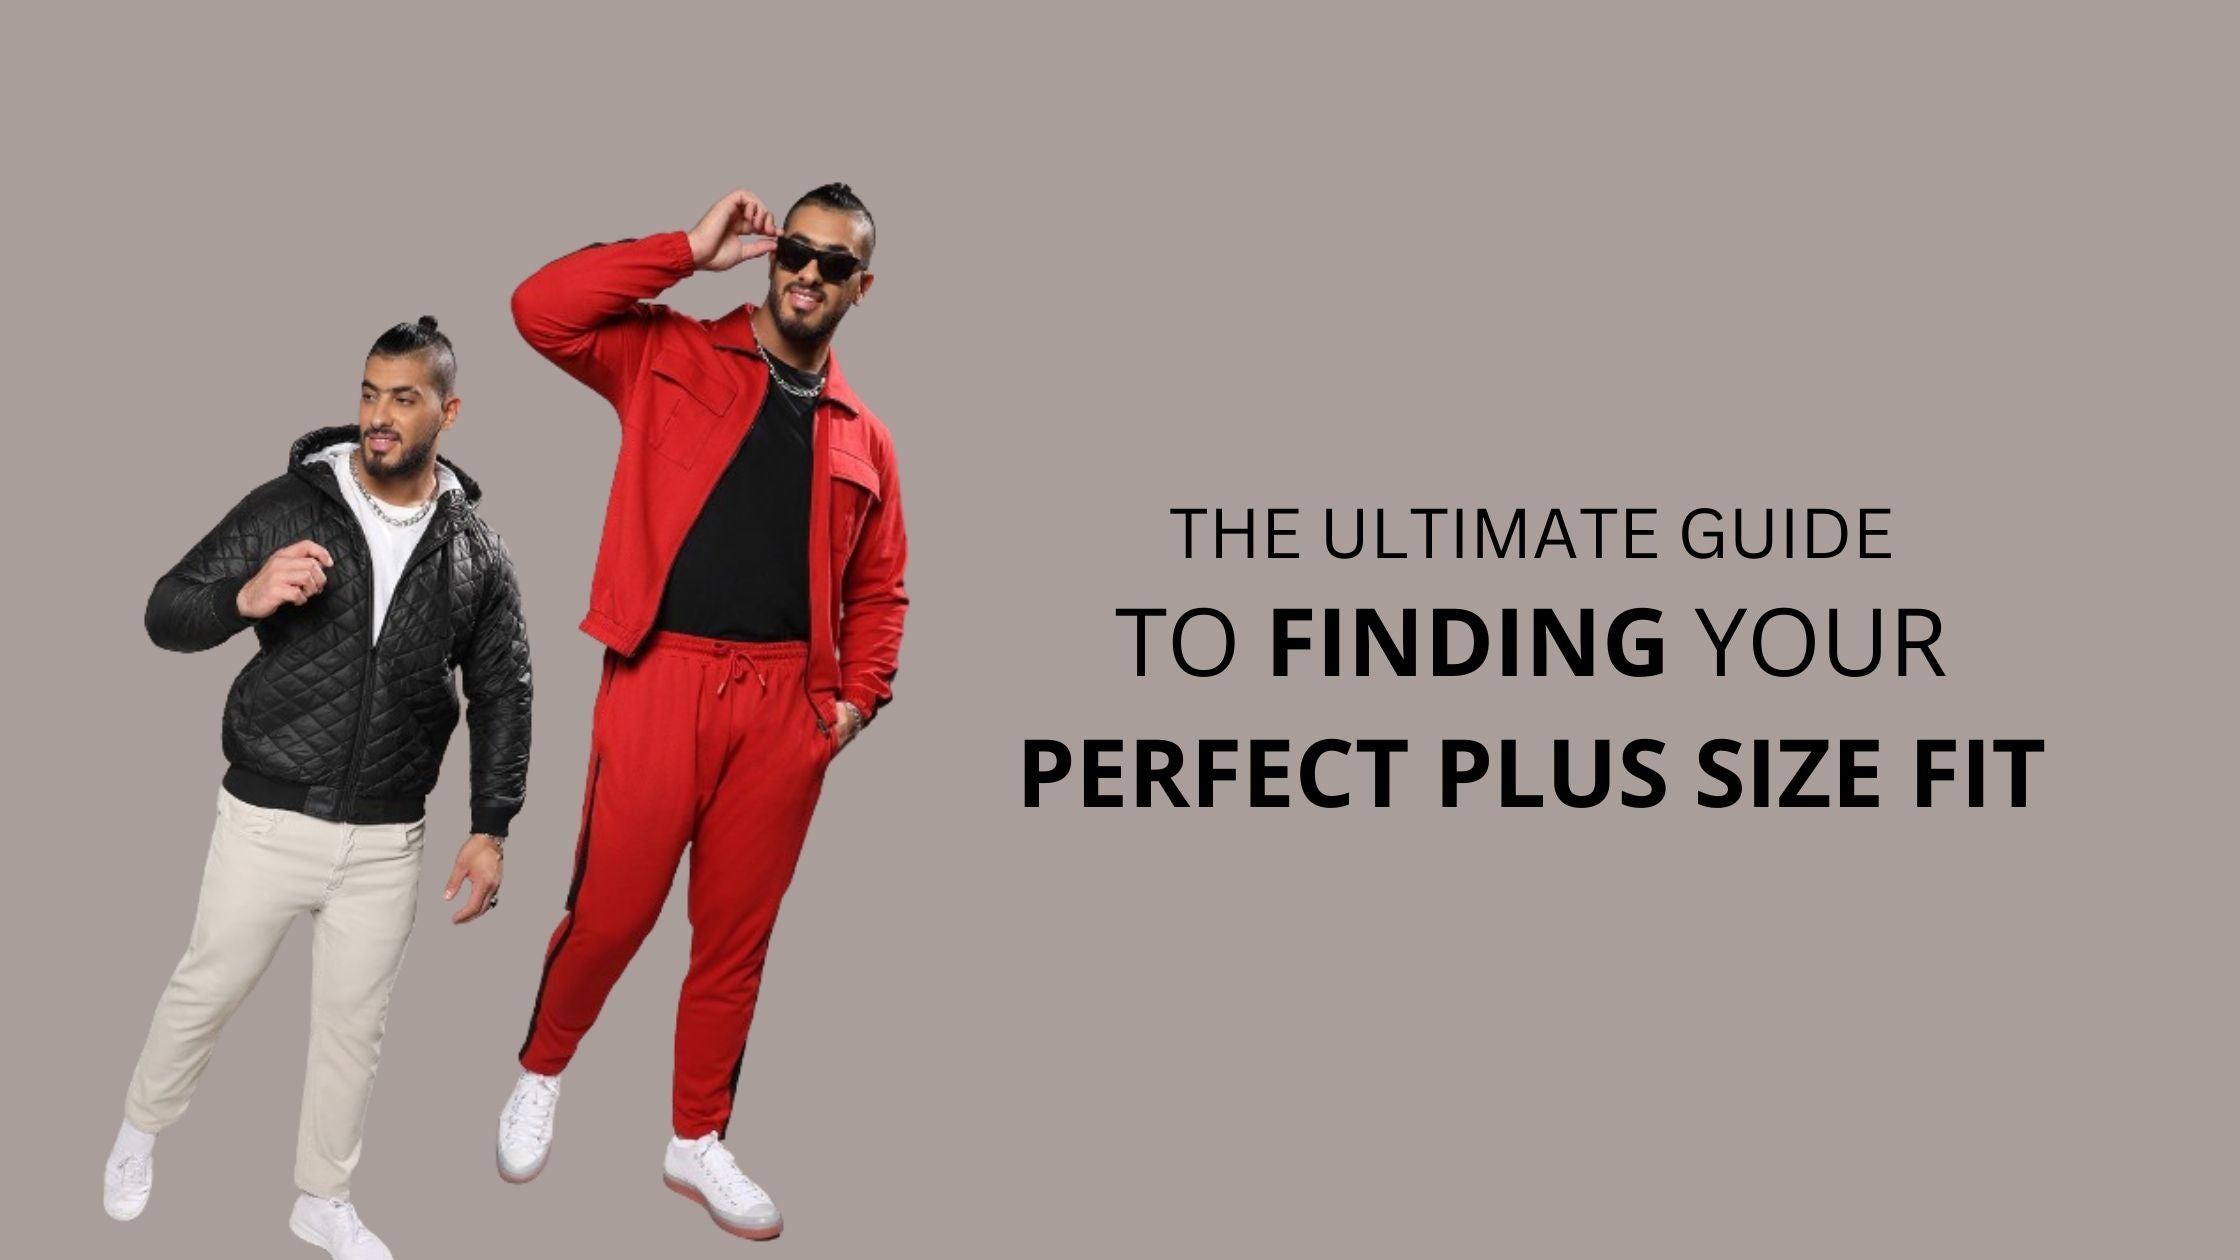 The ultimate guide to finding your perfect plus size fit